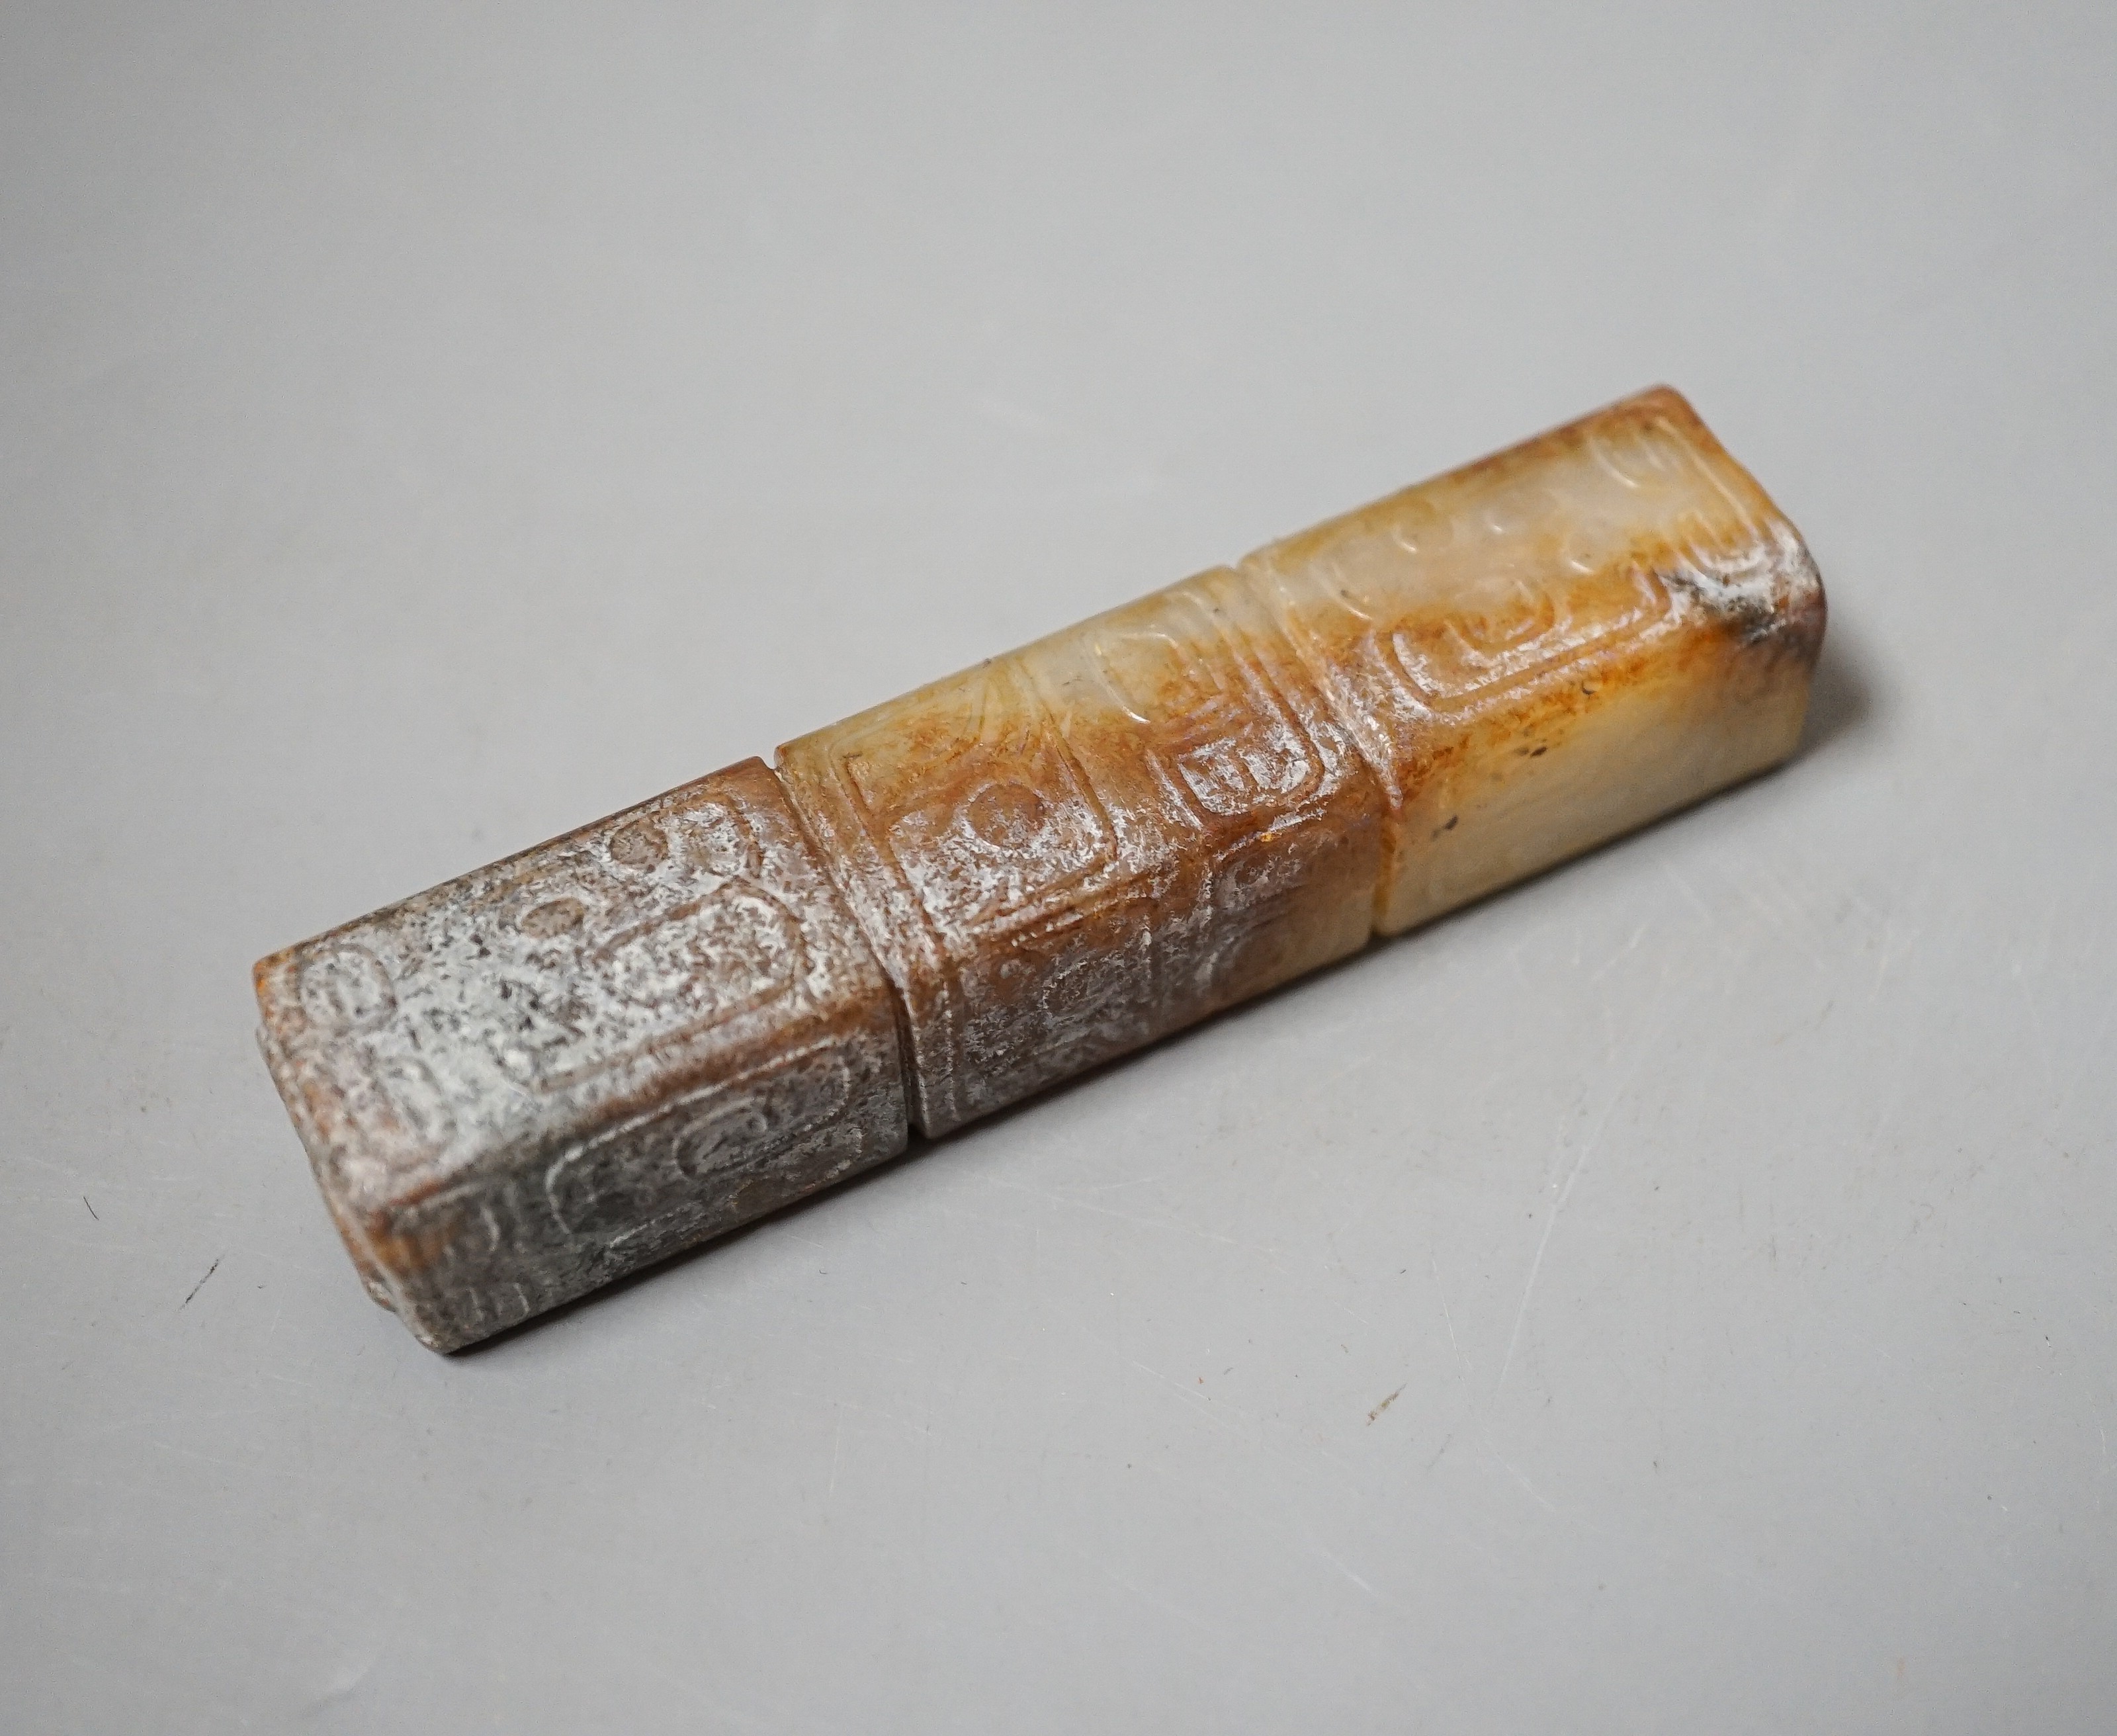 A Chinese archaistic white and russet jade handle mount, carved in relief with three registers of taotie masks, height 9.7cm